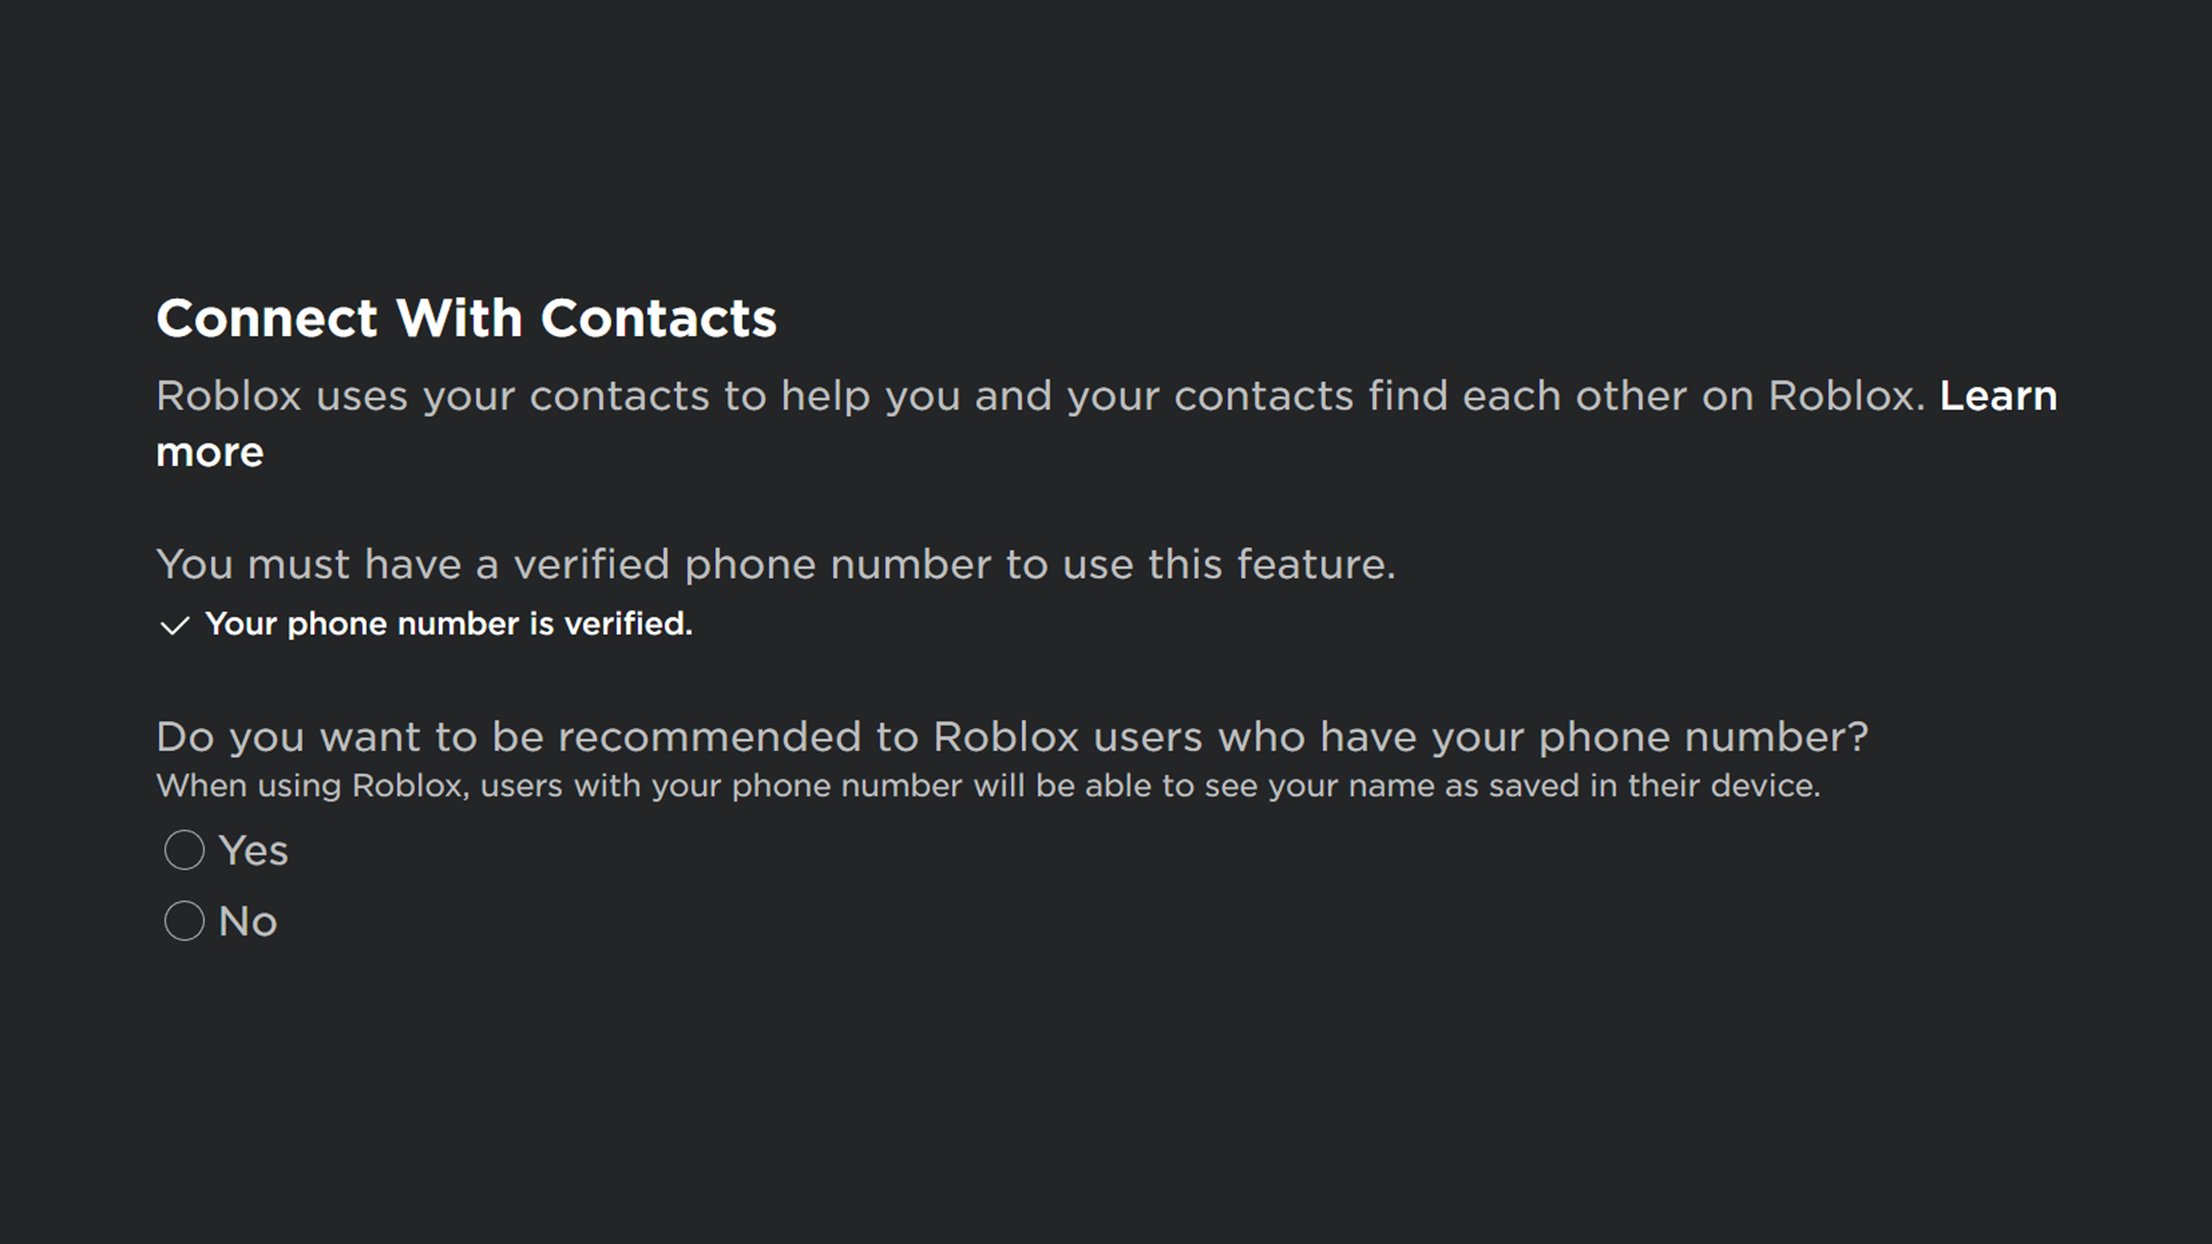 Roblox will let 13+ users import contacts and add recommended friends